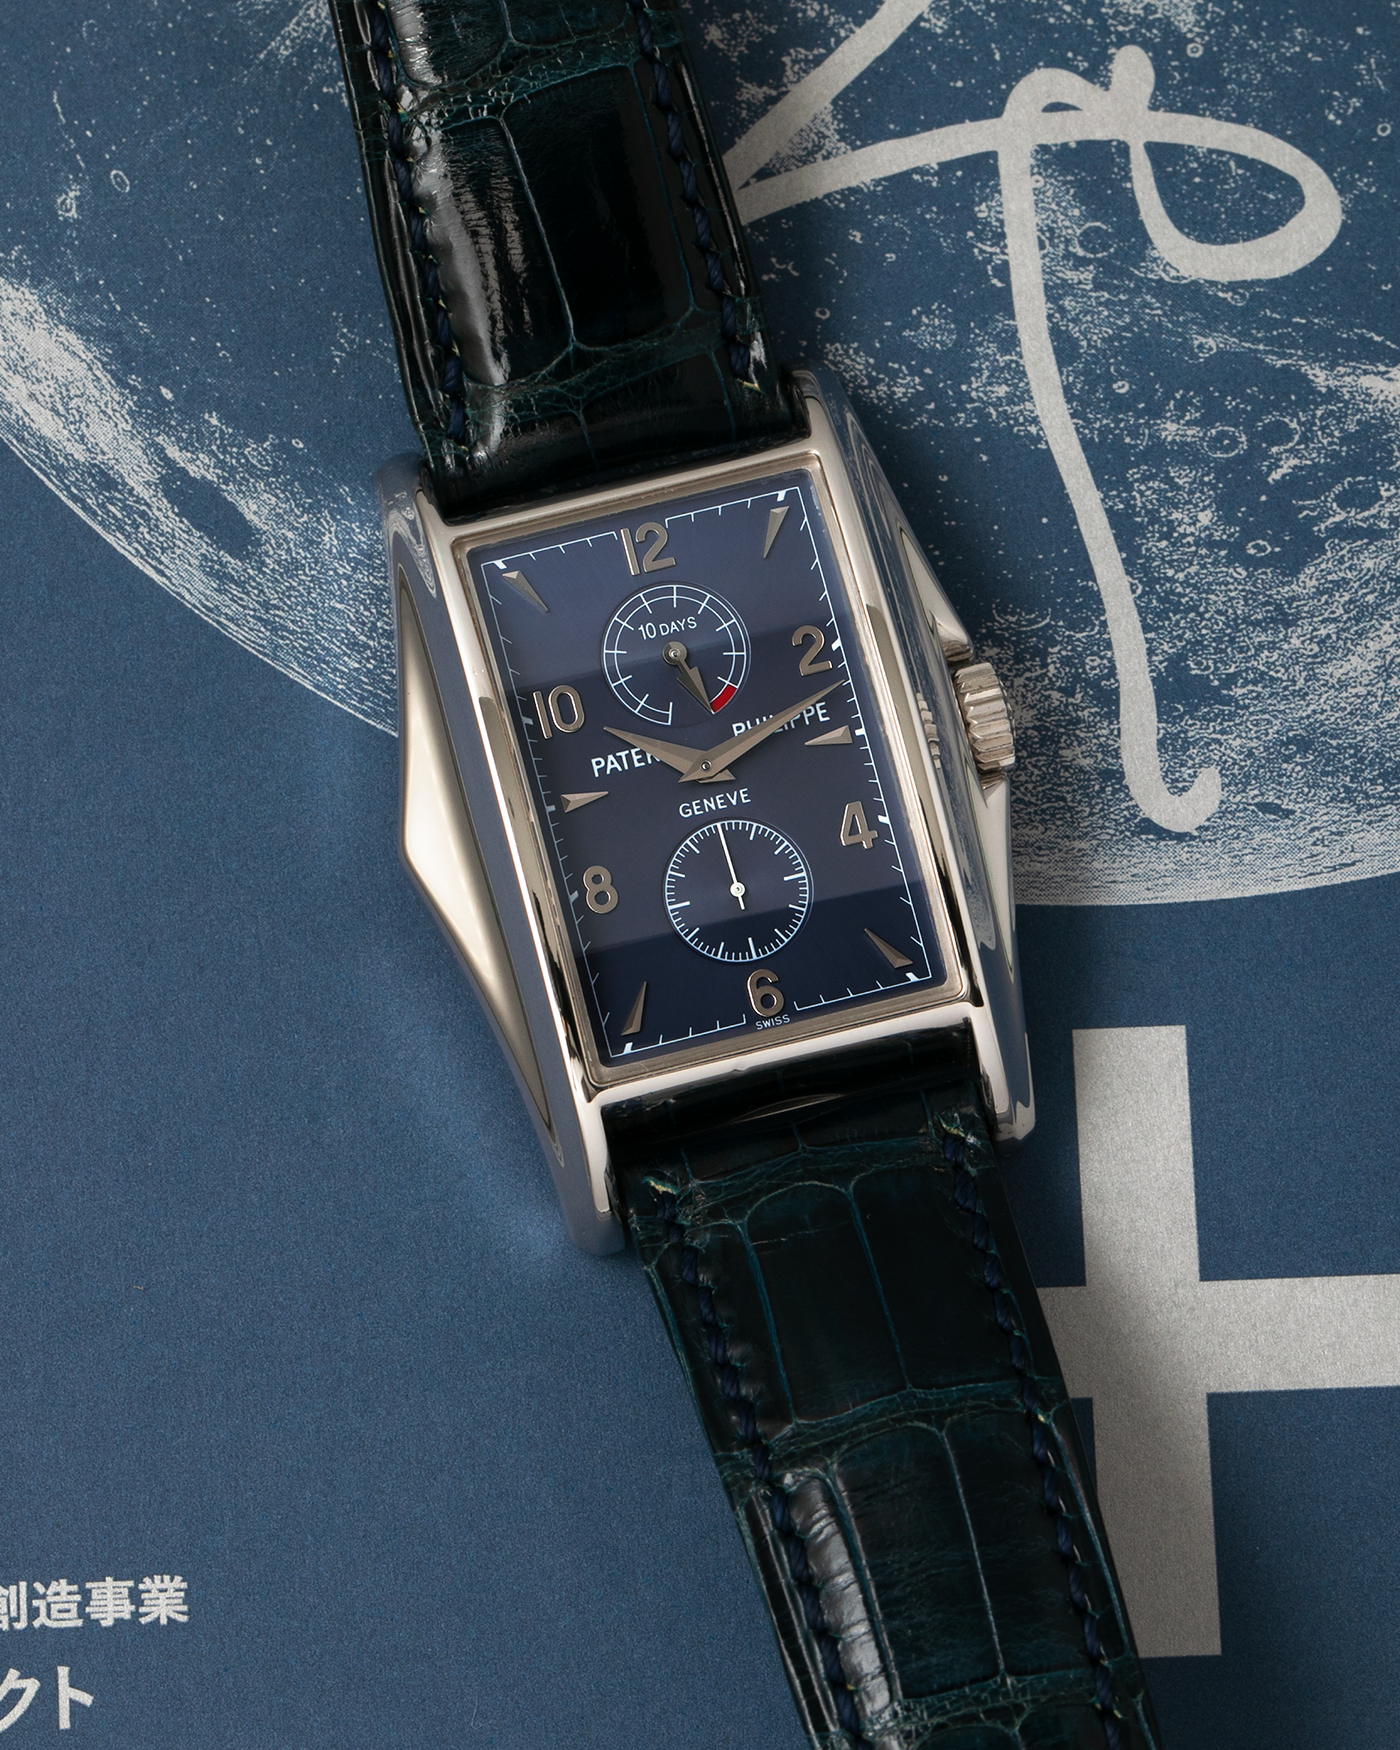 Brand: Patek Philippe Year: 2000 Model: Gondolo 10 Days, Limited Edition of 450 pieces in 18-carat White Gold Case / Blue Dial Reference Number: 5100G-001 Material: 18-carat White Gold  Movement: Patek Philippe Cal. 28-20/200 PS IRM, Manual-Winding Case Dimensions: 46mm x 34mm Lug Width: 20mm Strap: Patek Philippe Blue Alligator Strap with Signed 18-carat White Gold Tang Buckle